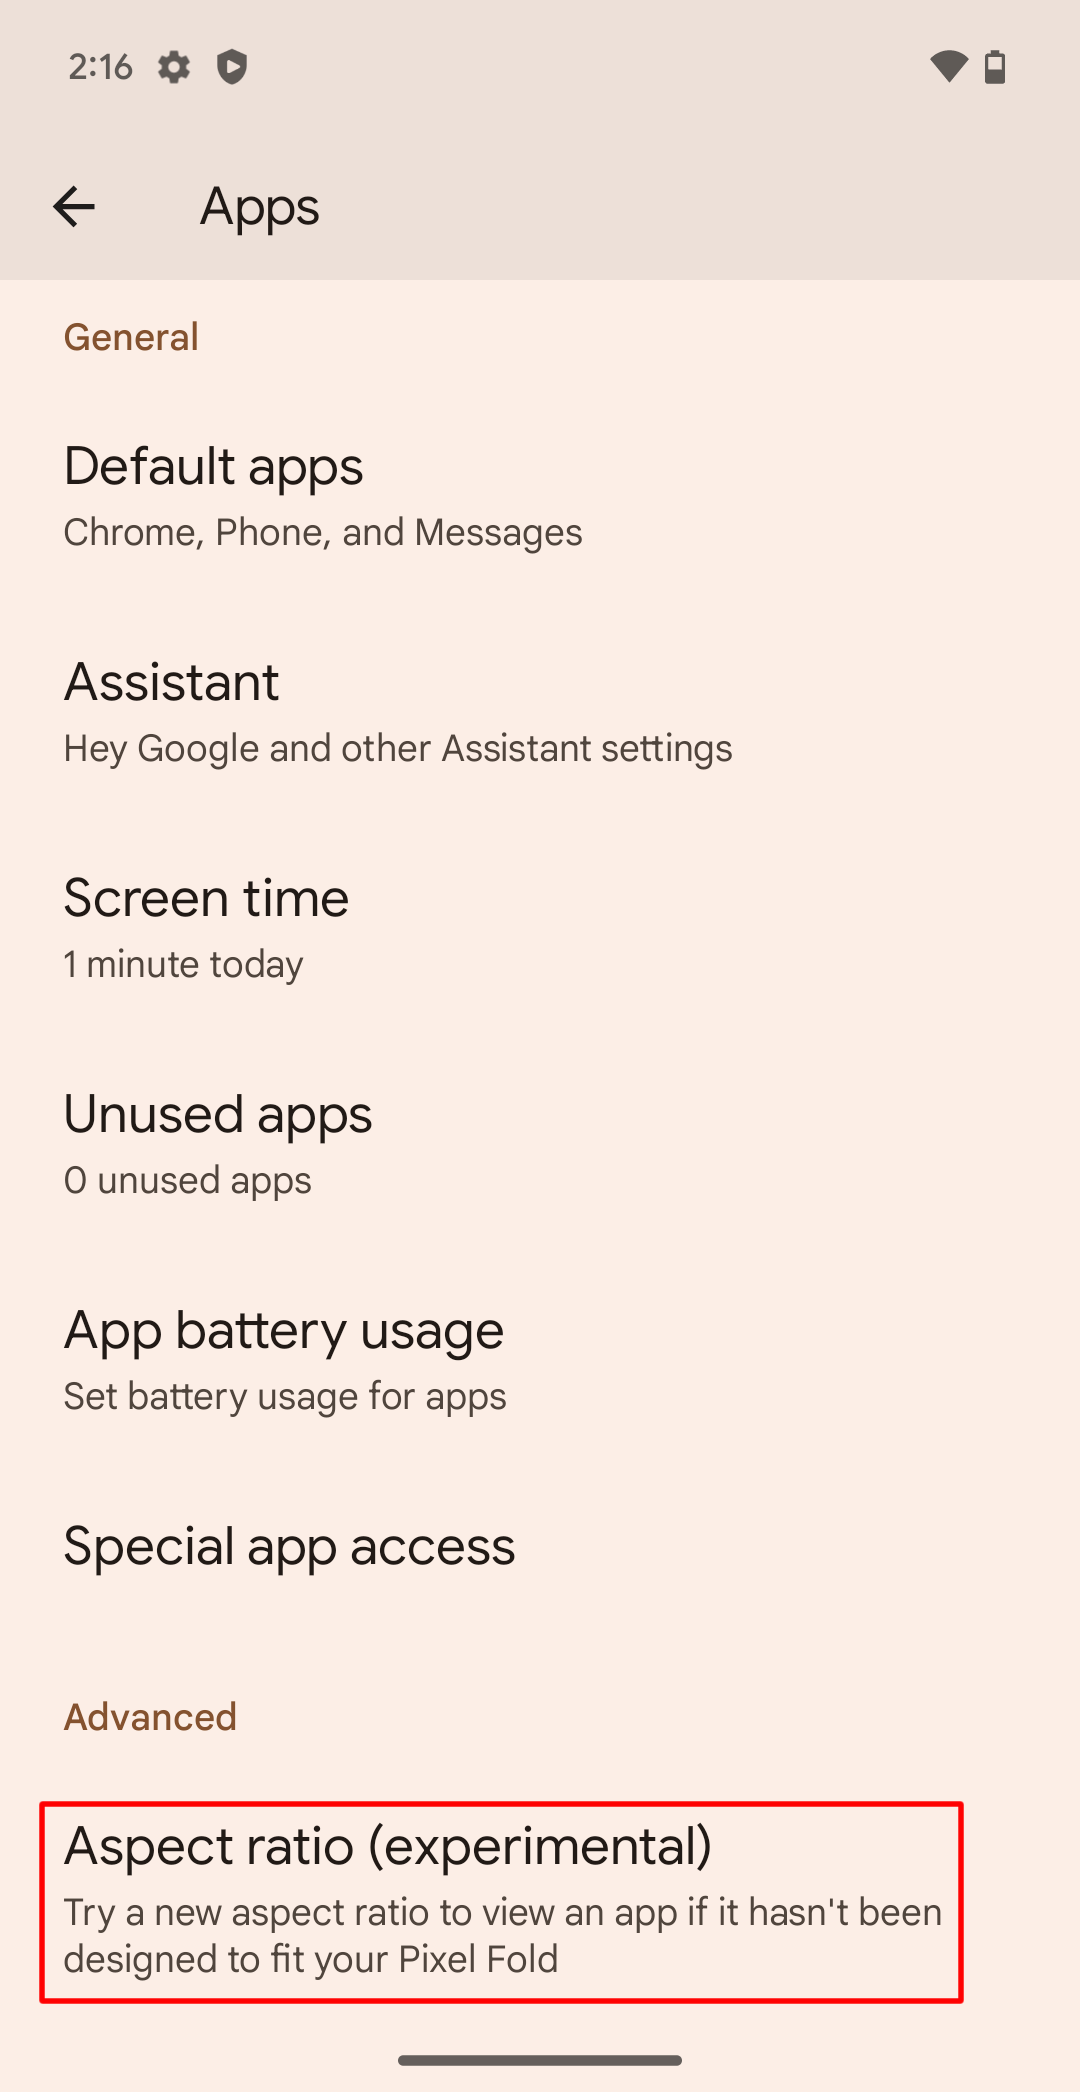 Selecting the Aspect ratio section in the Settings app on a Google Pixel Fold